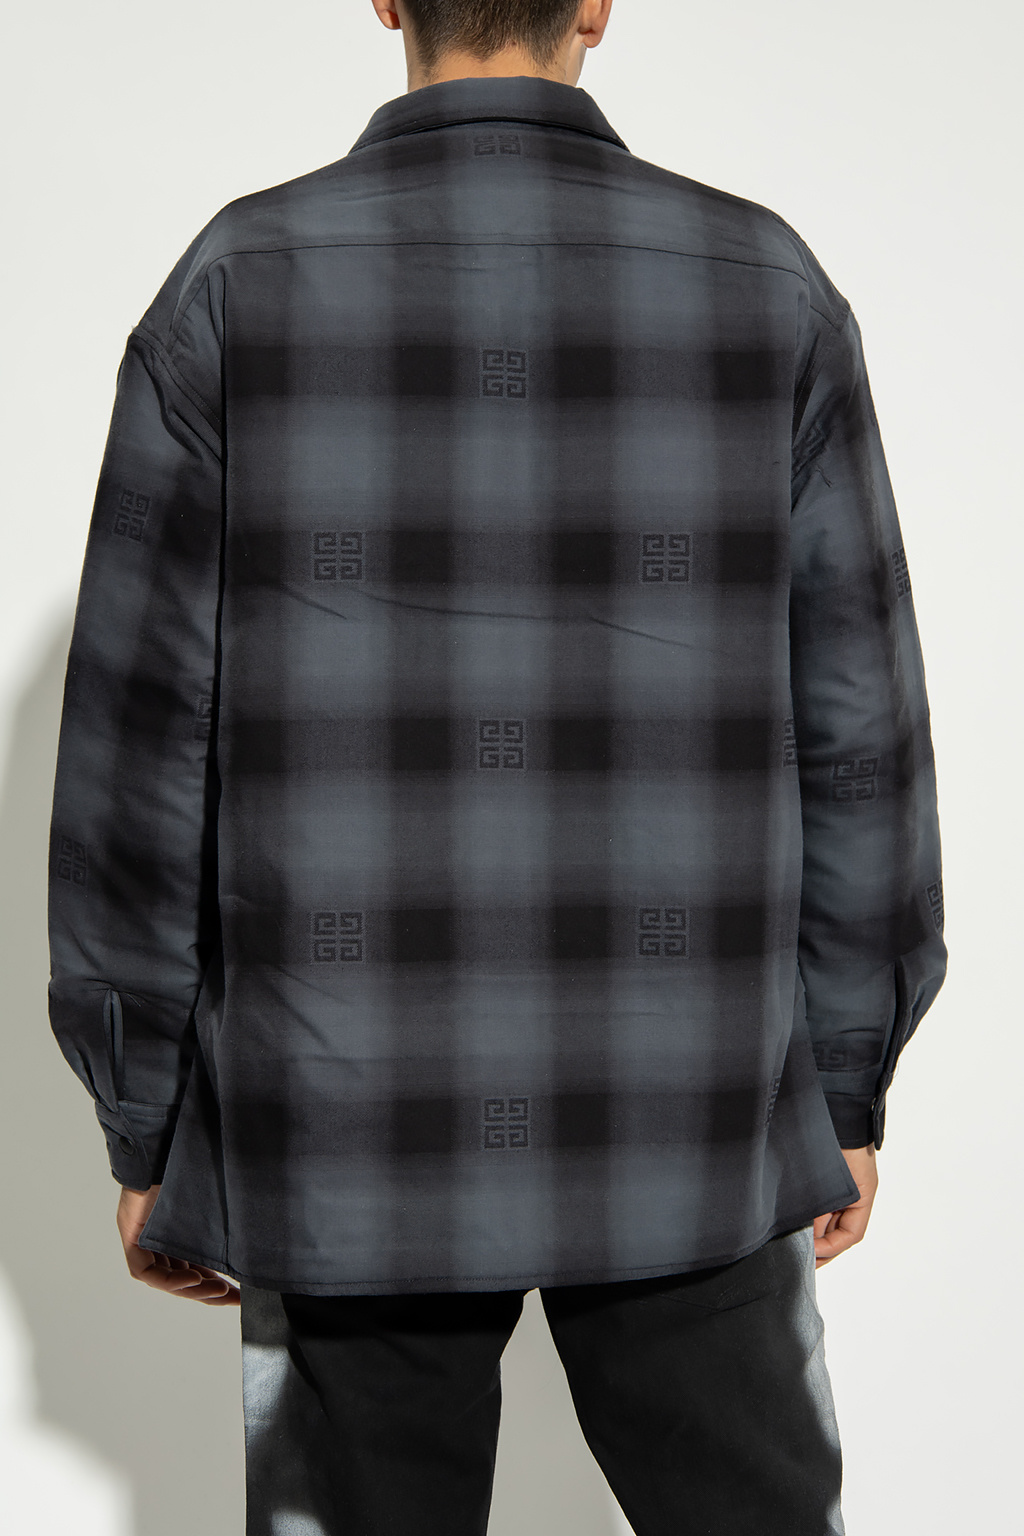 givenchy CRDHLDR Insulated jacket